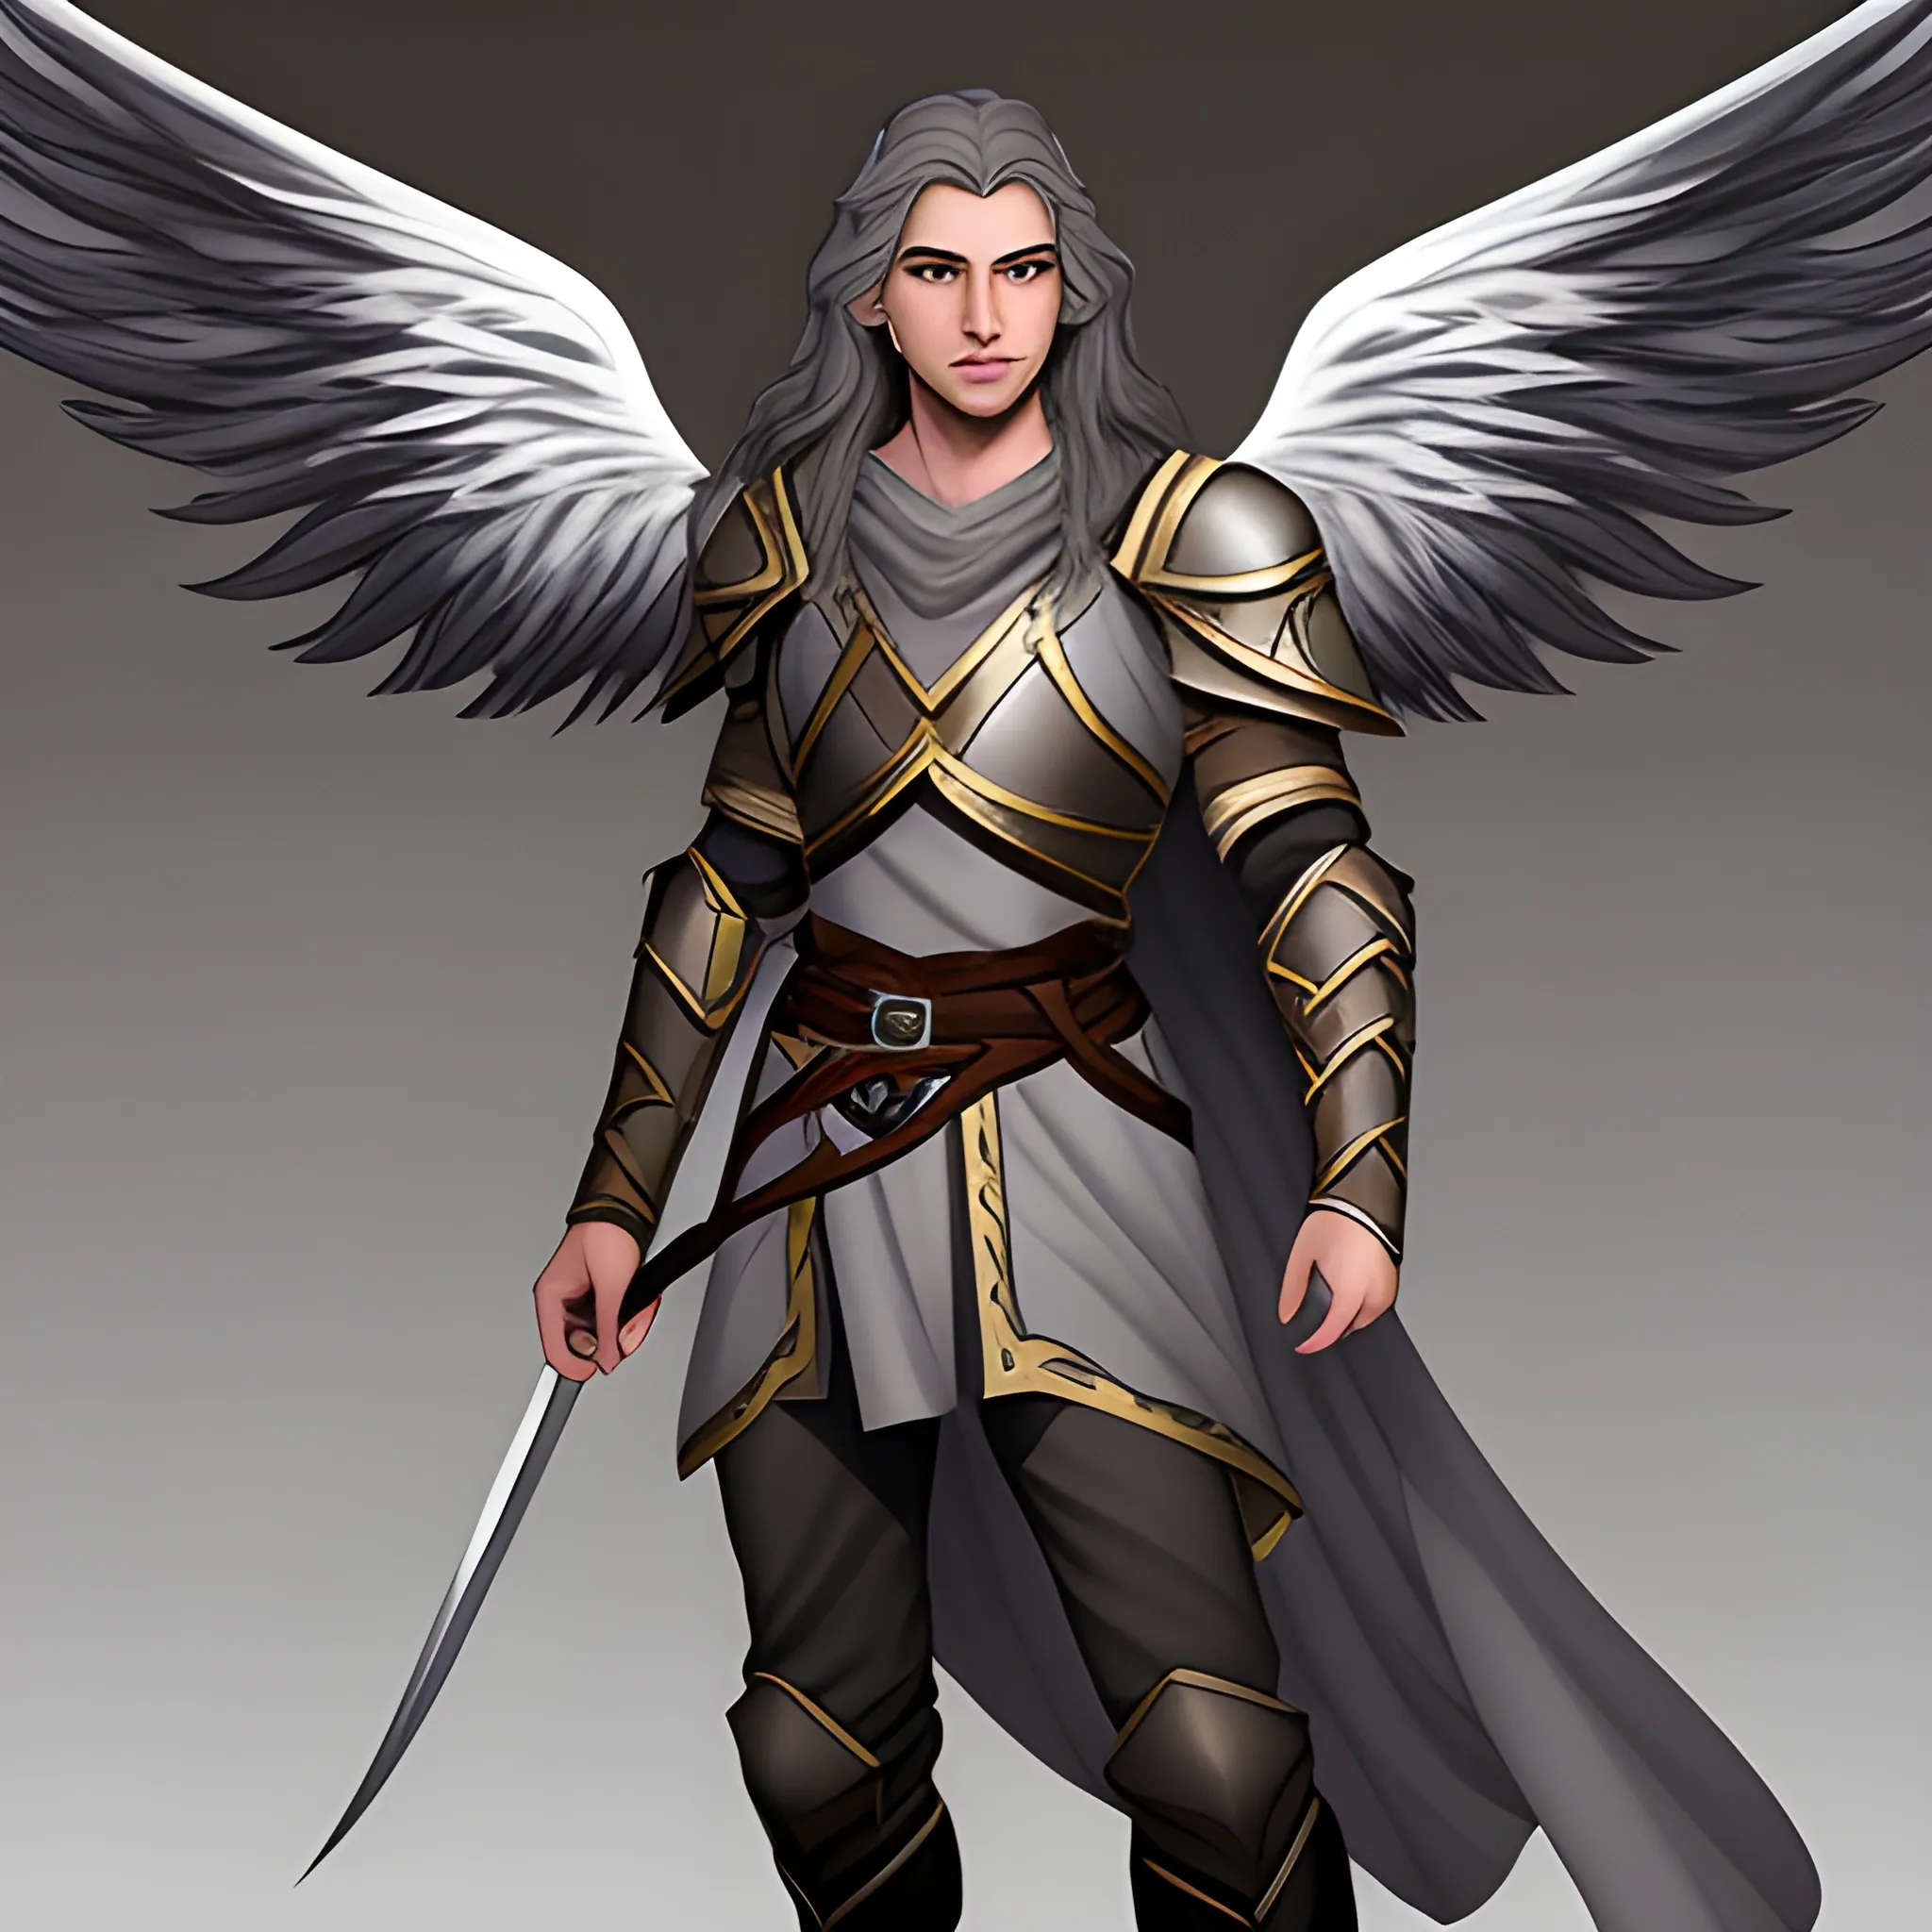 male aasimar from dungeons & dragons with: brown, semi-wavy and semi-long hair; very light gray and slightly shiny skin; dark grey eyes; grey wings